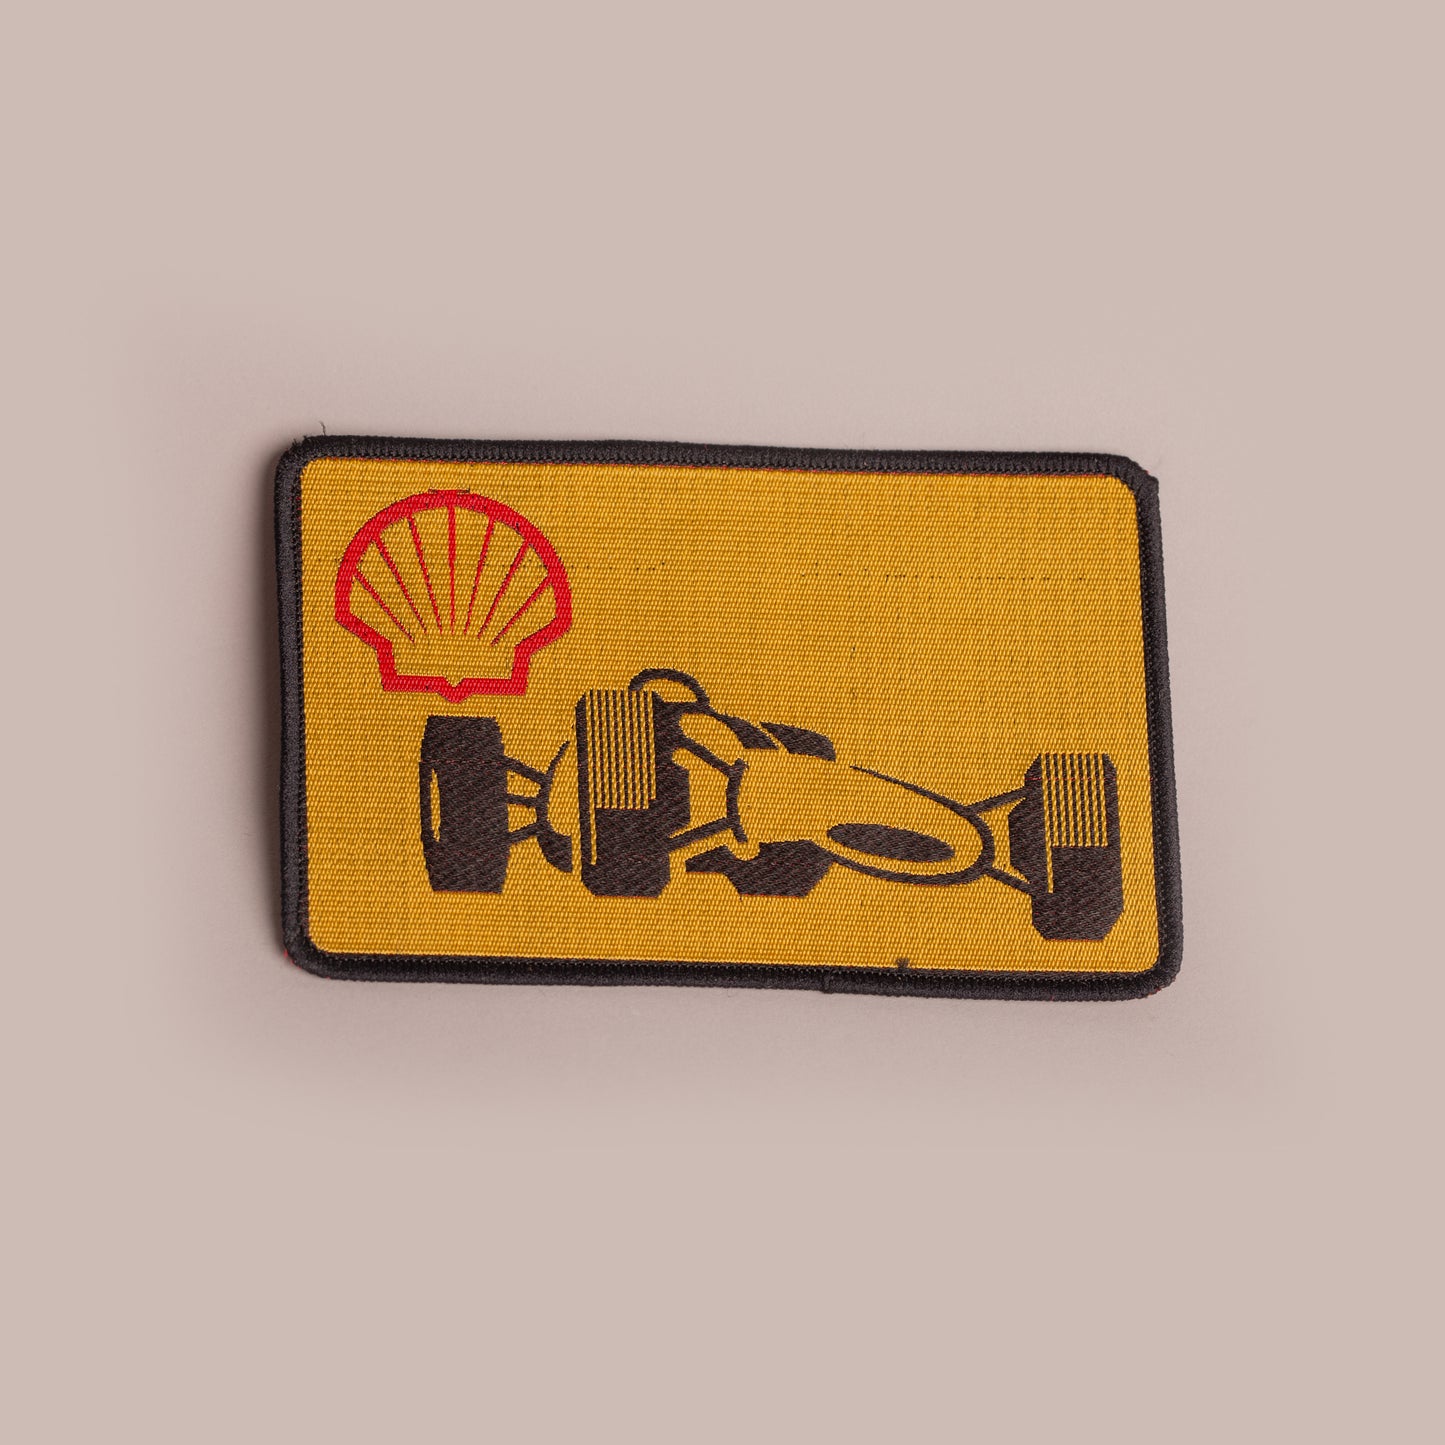 Vintage Patch - Shell Racing